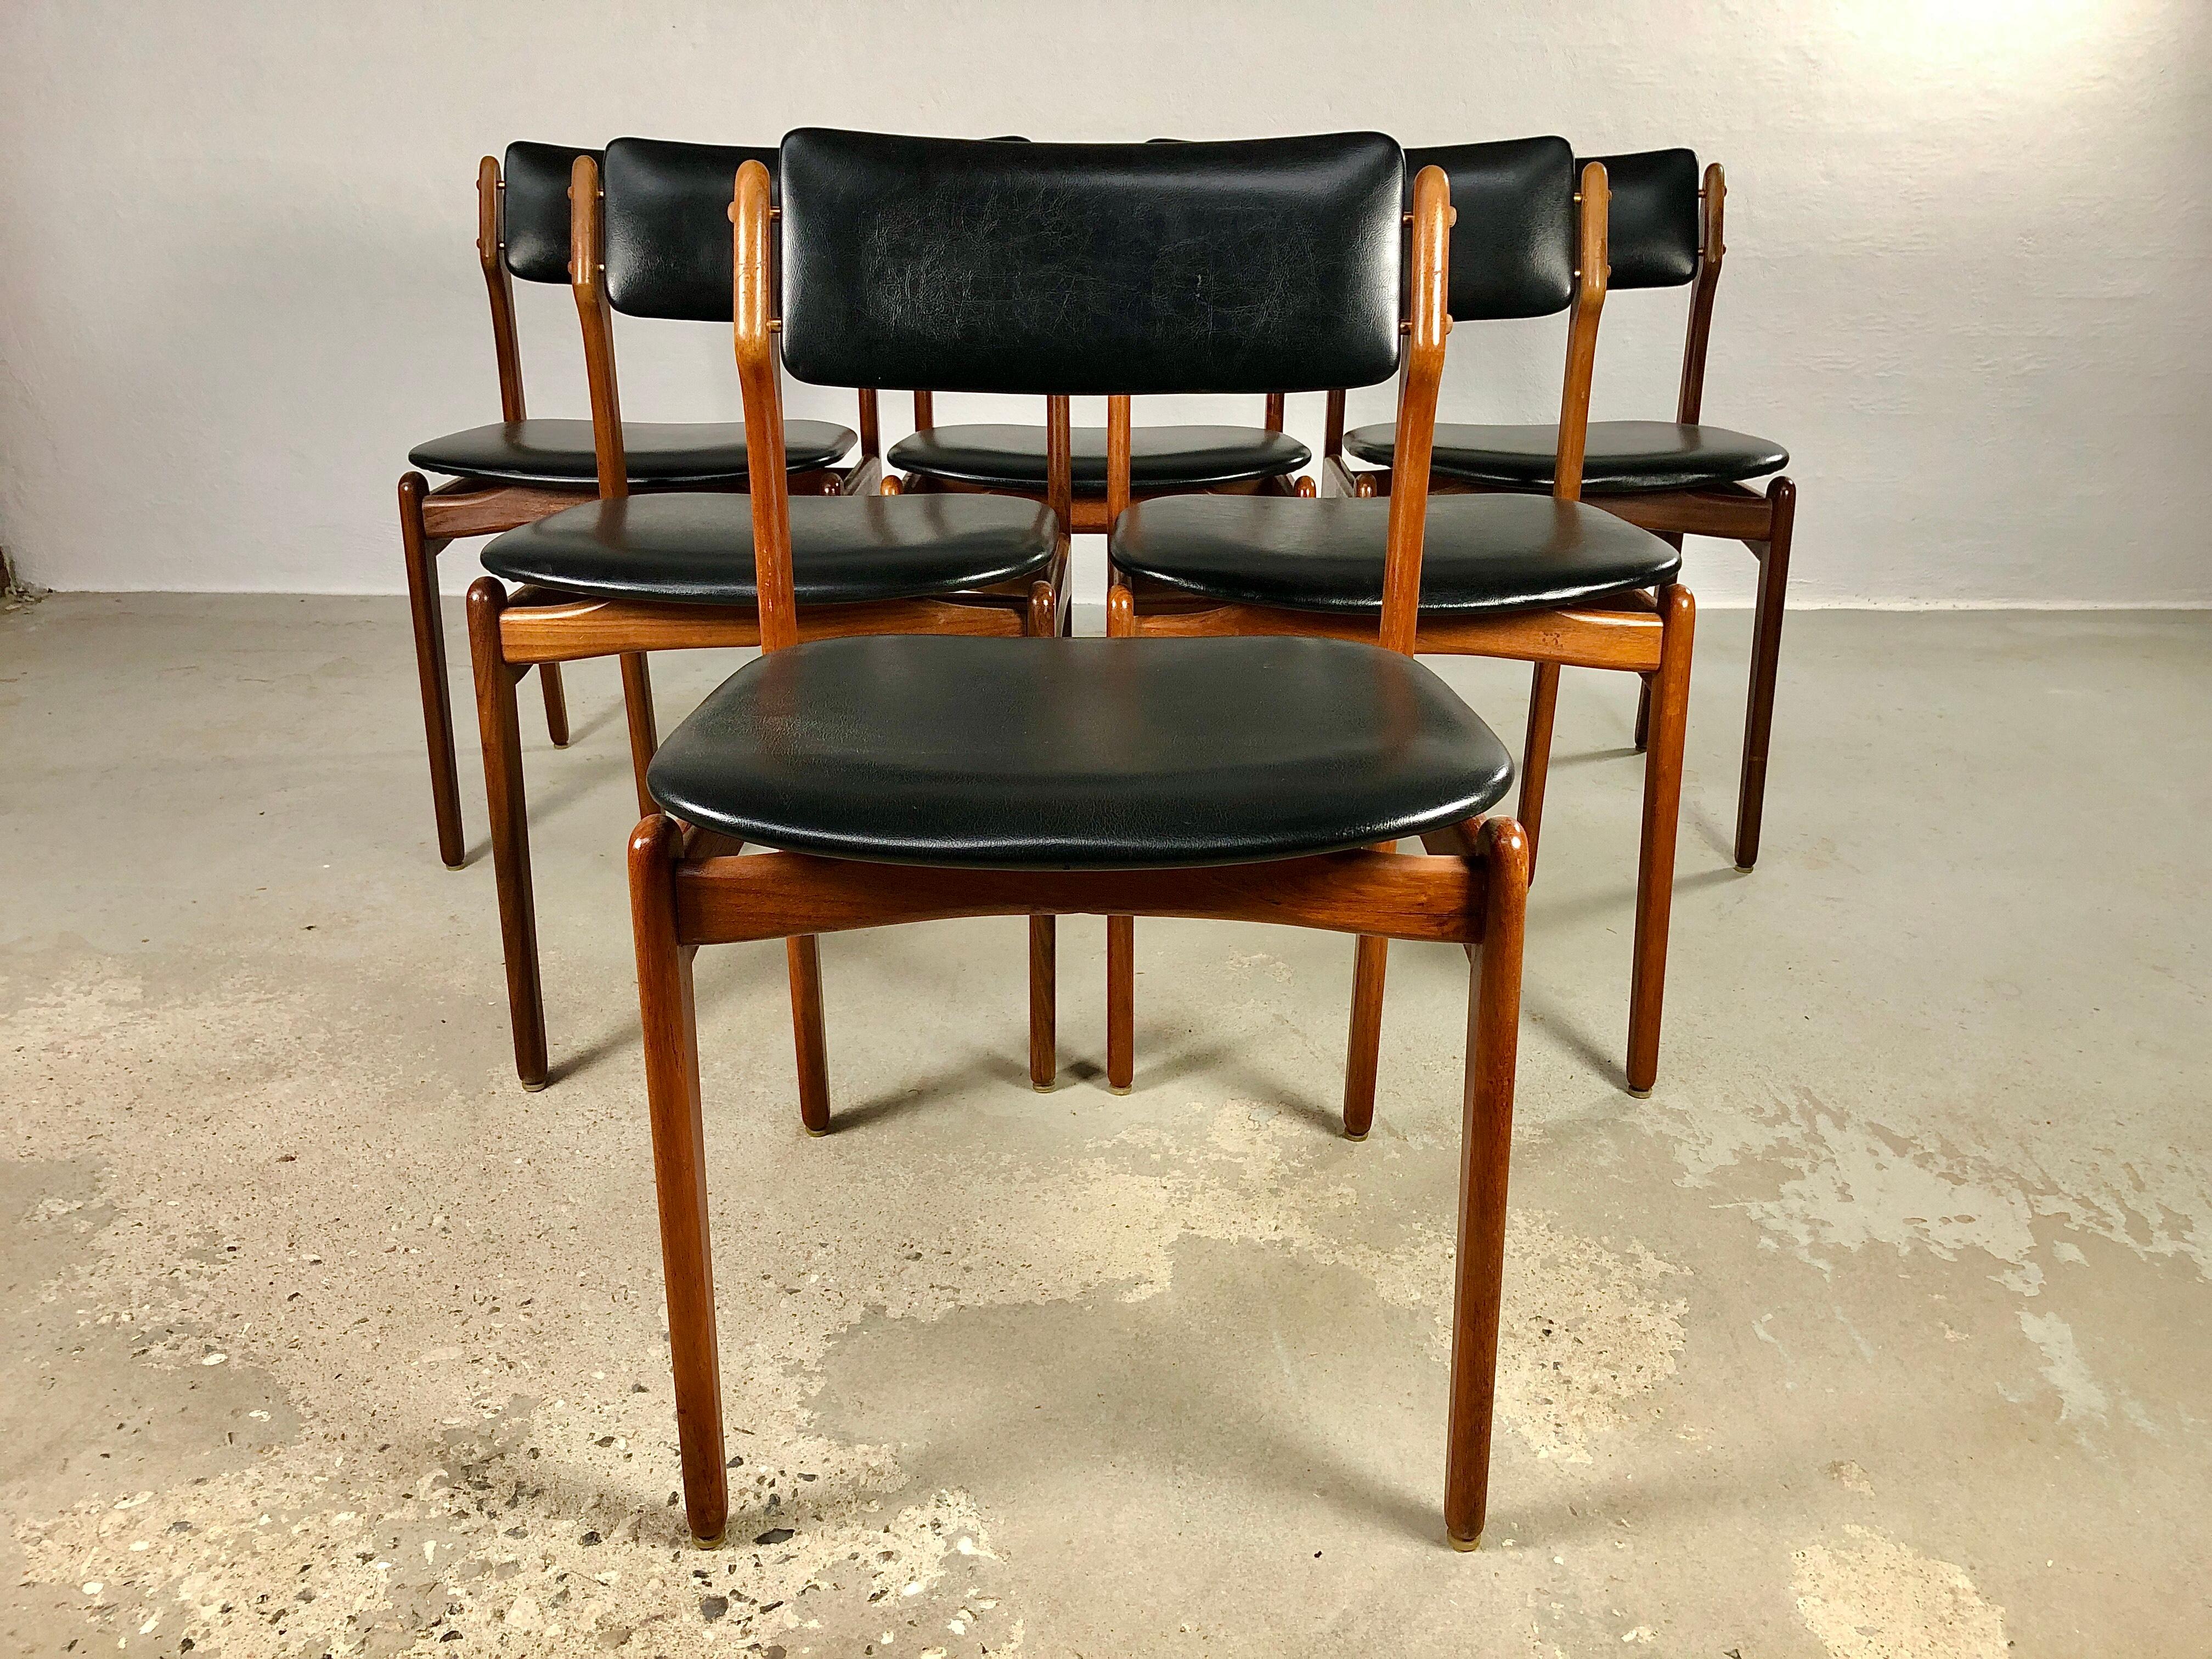 Danish set of 6 fully restored and reupholstered Erik Buch teak dining chairs 

The chairs feature simple yet elegant shapes with their straight forward lines combined with Erik Buchs organic shapes in the wooden details around the backrests and